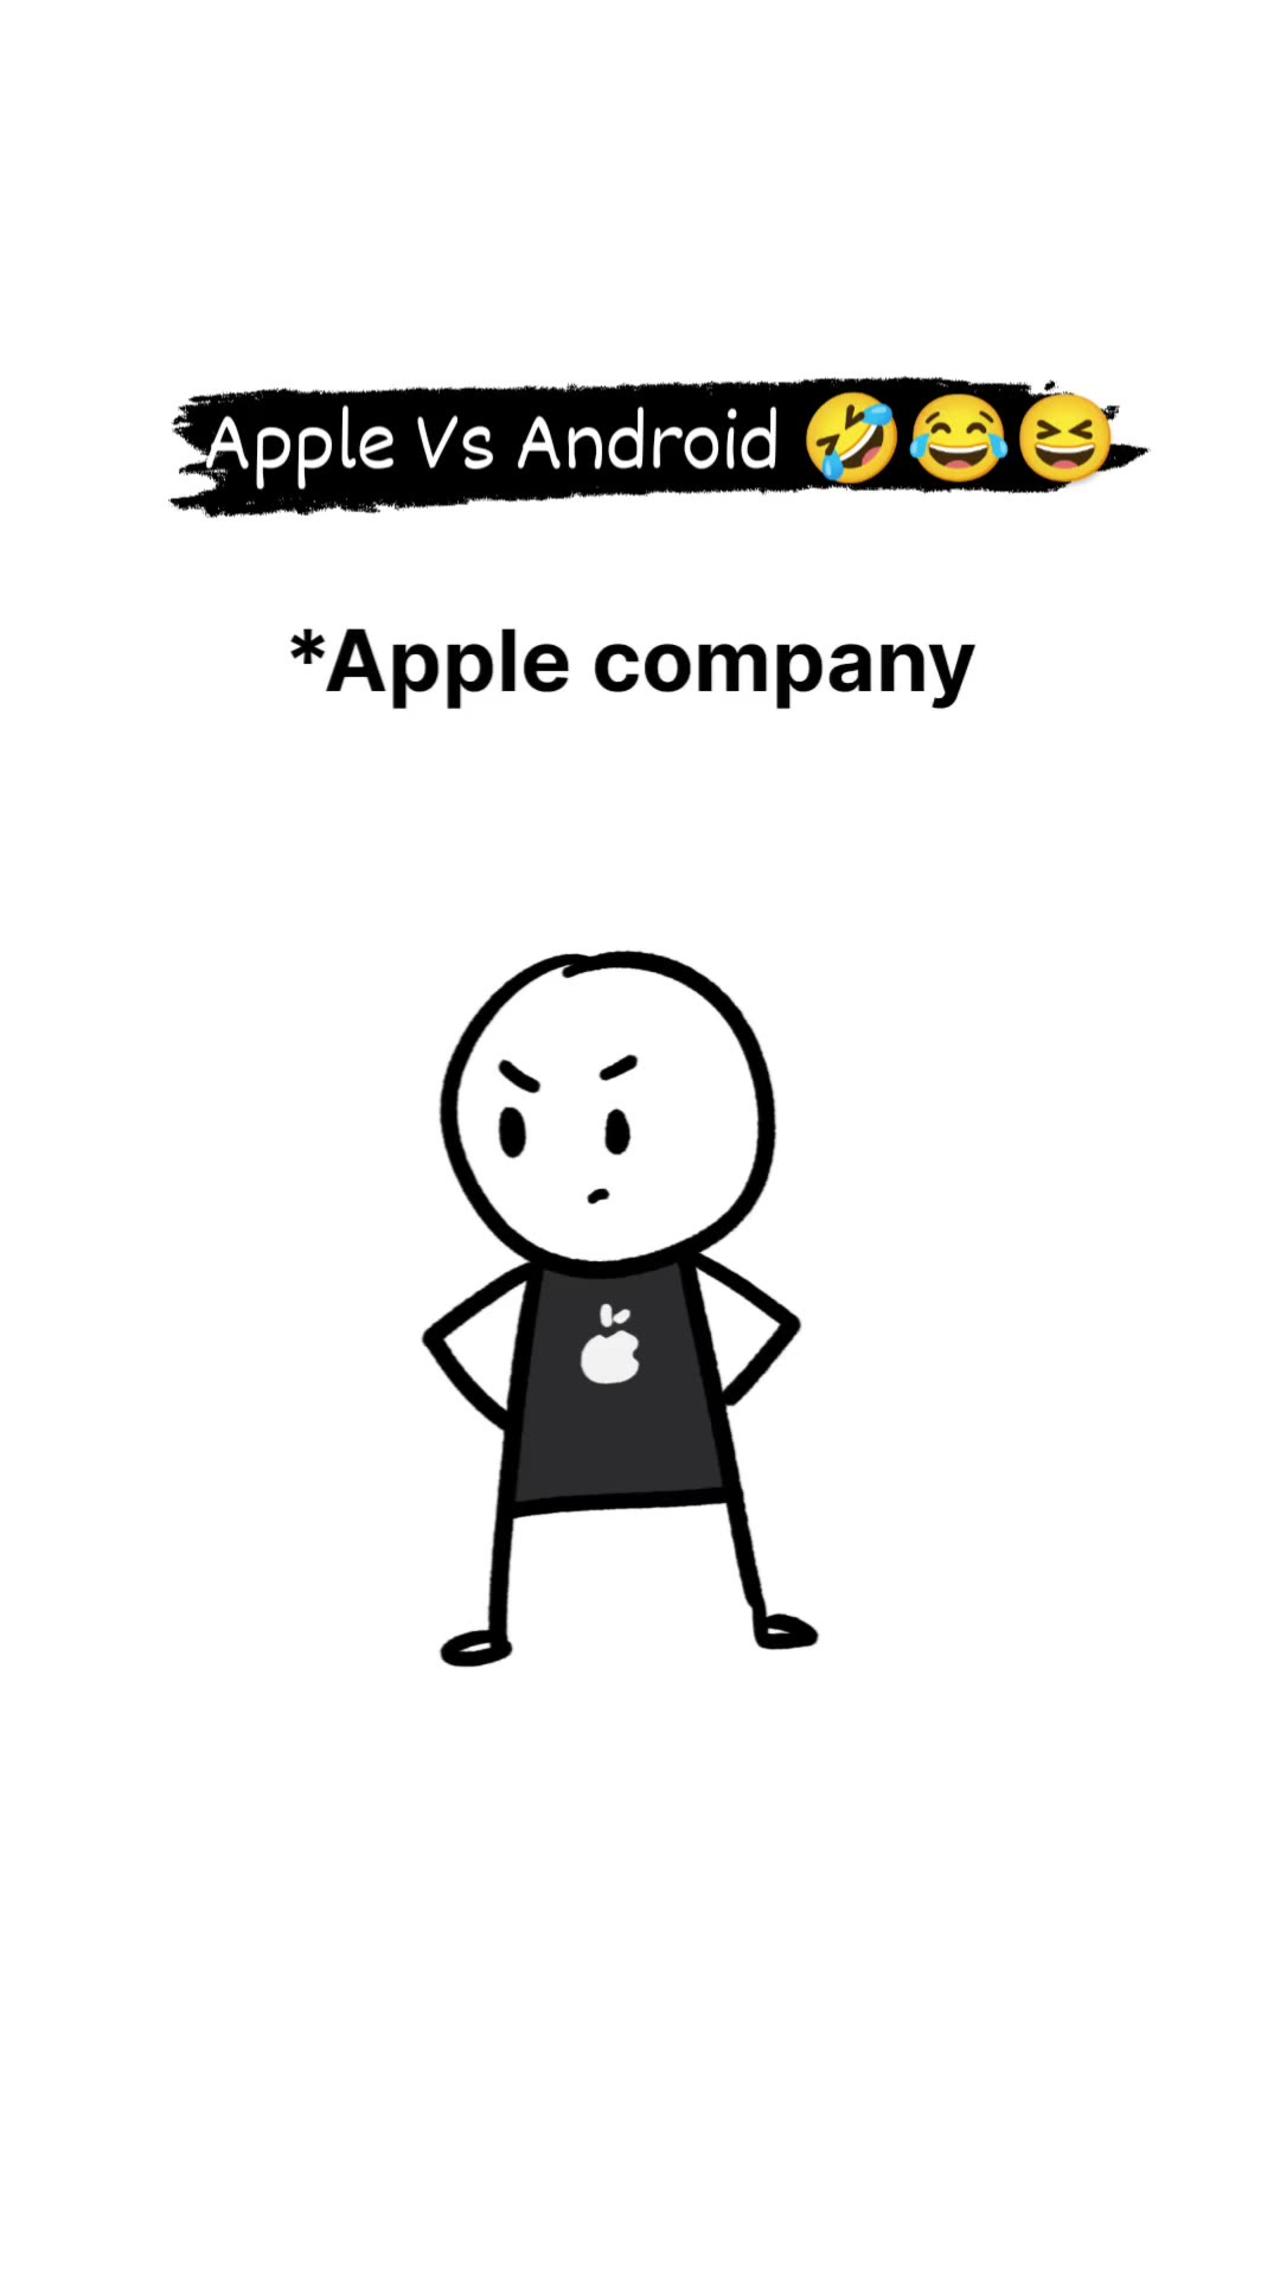 Apple vs Android mobile phone company